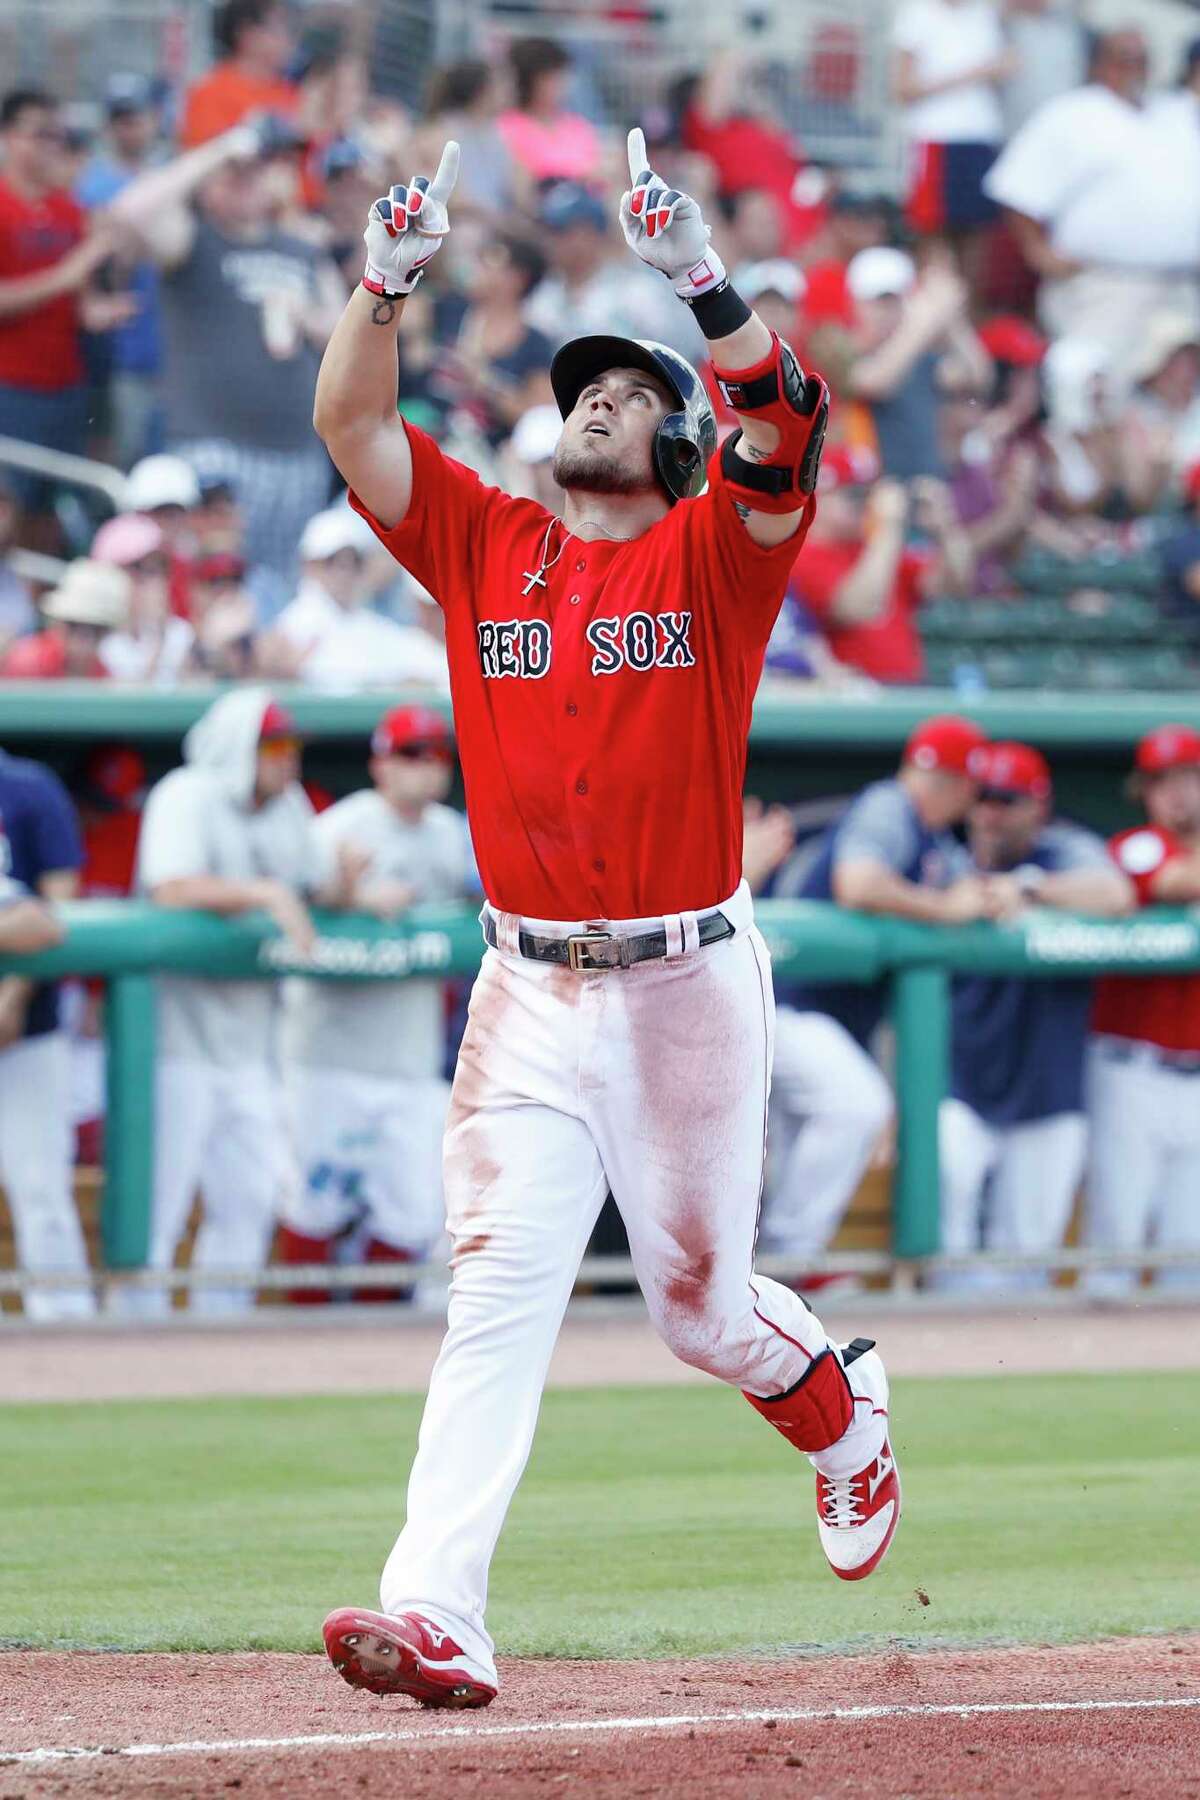 FORT MYERS, FL - FEBRUARY 23: Michael Chavis #65 of the Boston Red Sox reacts after hitting a three-run home run in the third inning of a Grapefruit League spring training game against the New York Yankees at JetBlue Park at Fenway South on February 23, 2019 in Fort Myers, Florida. (Photo by Joe Robbins/Getty Images)